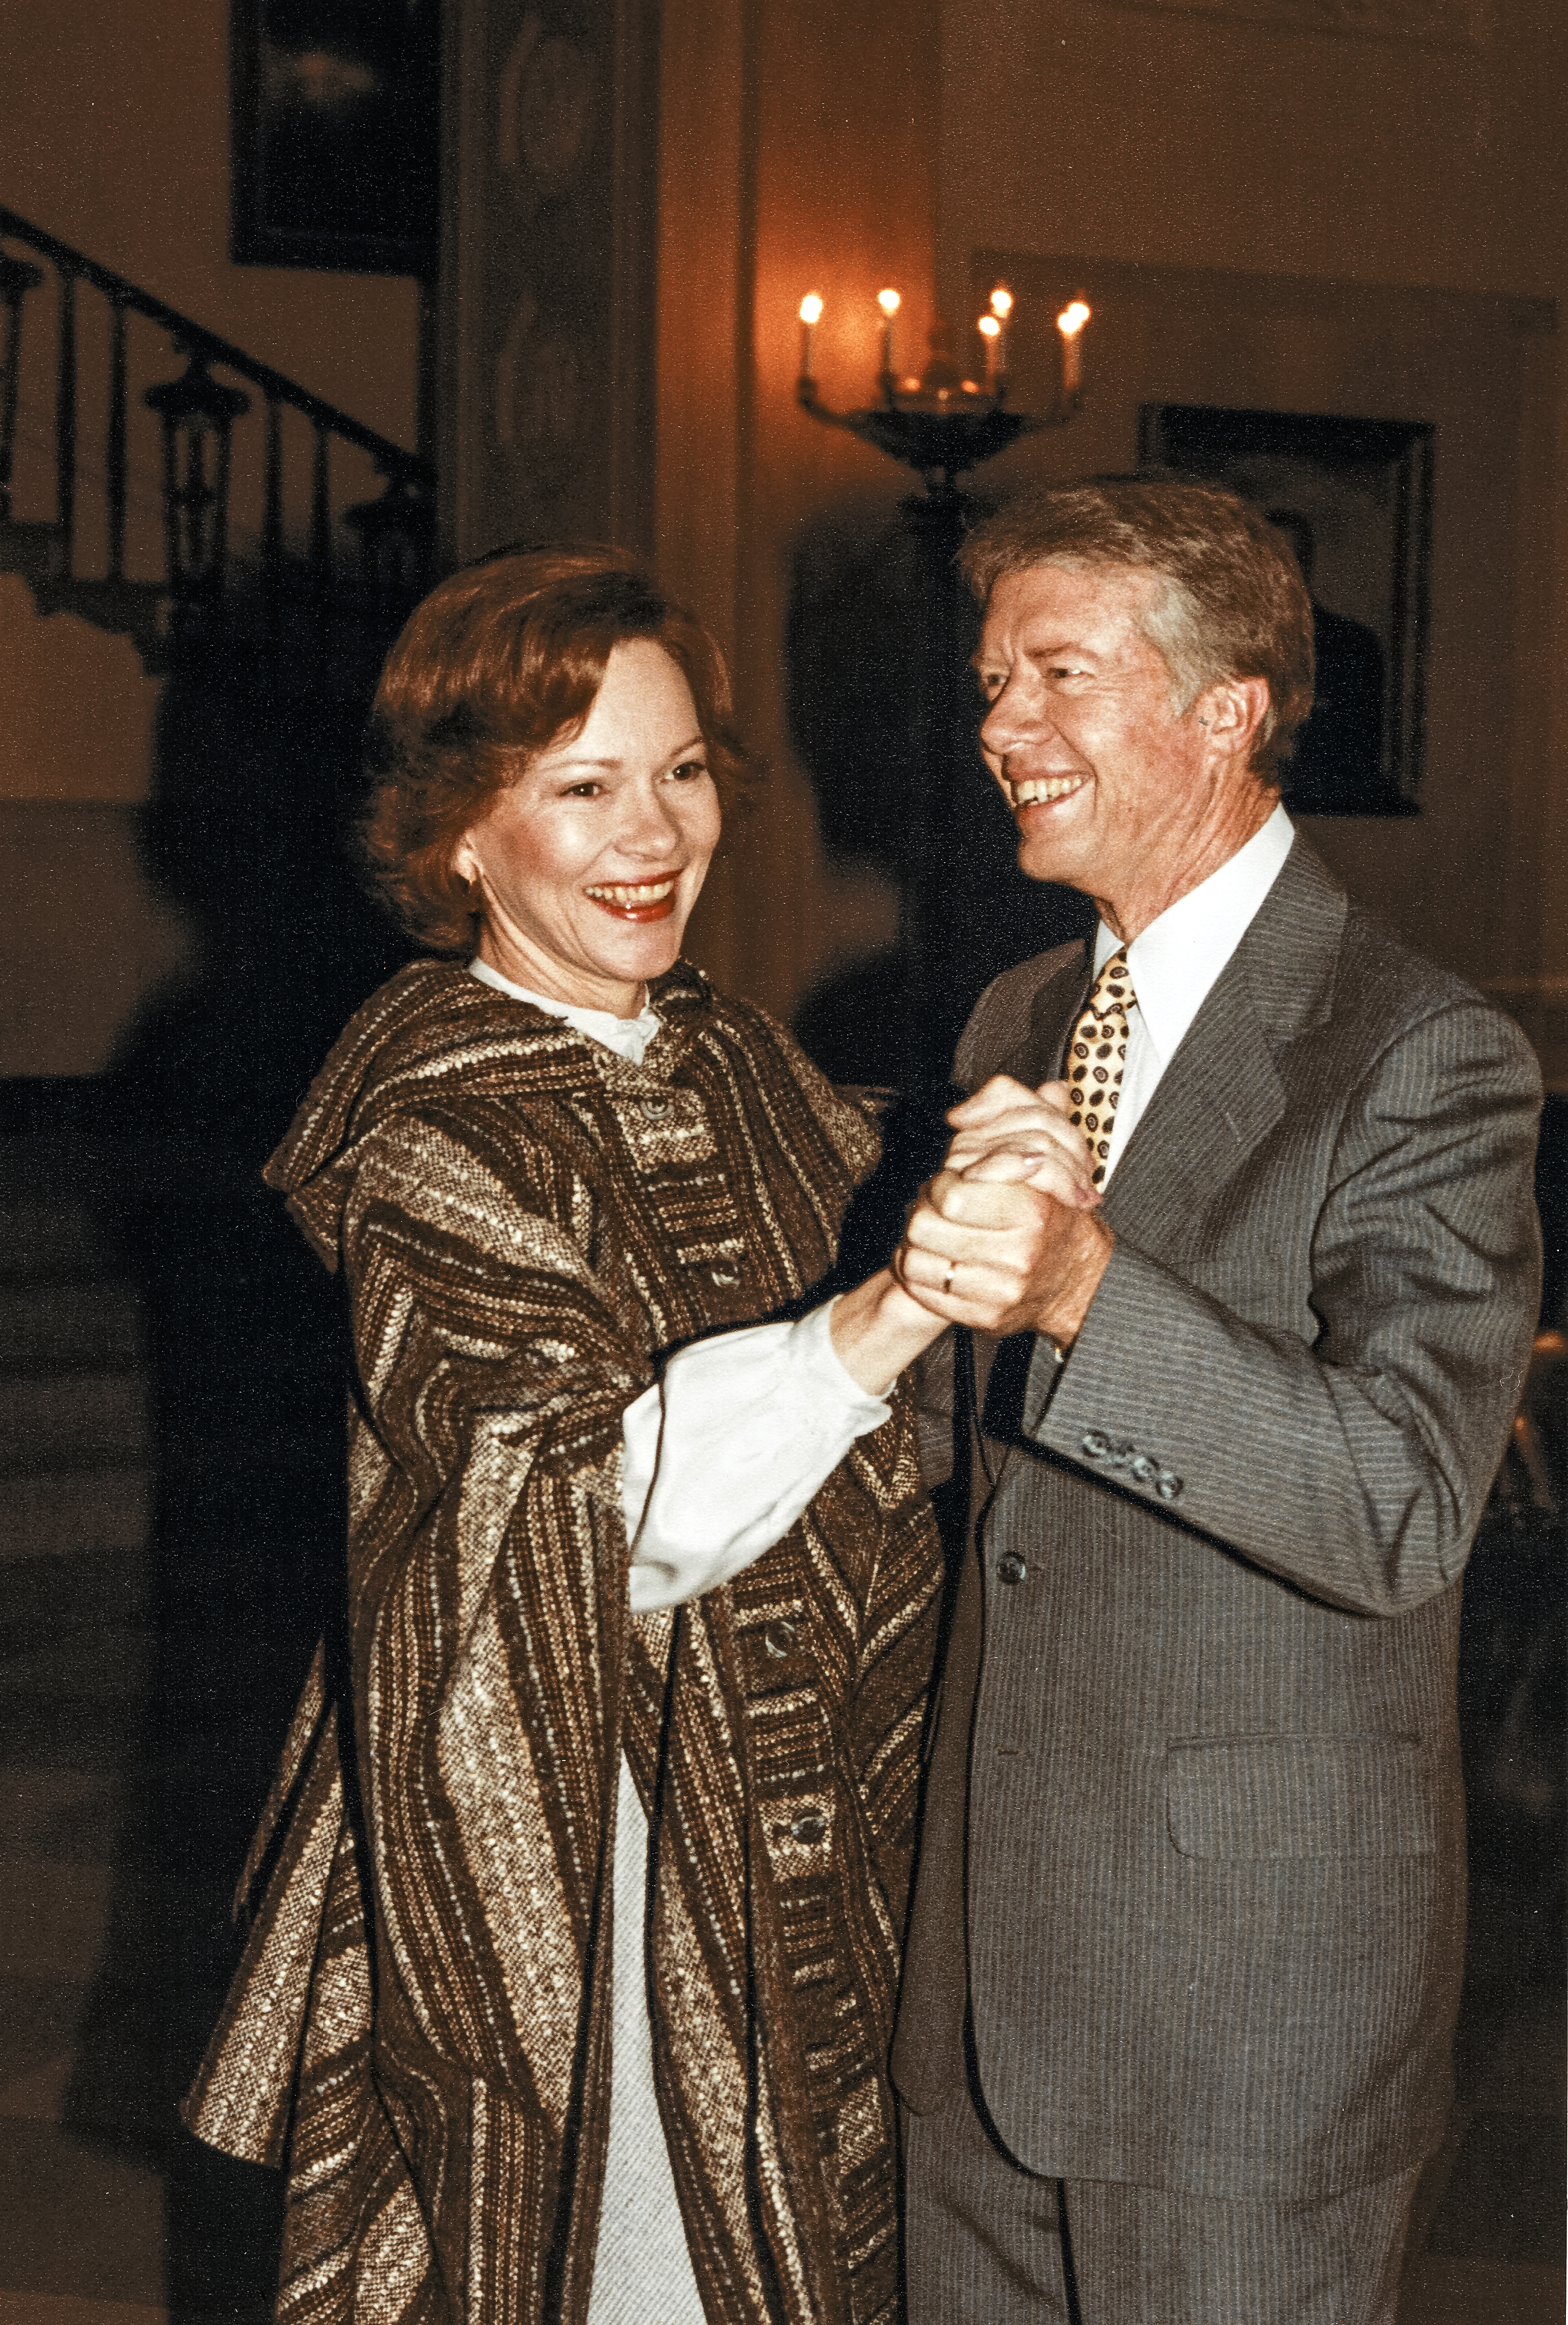 Former First Lady Rosalynn Carter and President Jimmy Carter at the White House in Washington D.C. in 1979 | Source: Getty Images